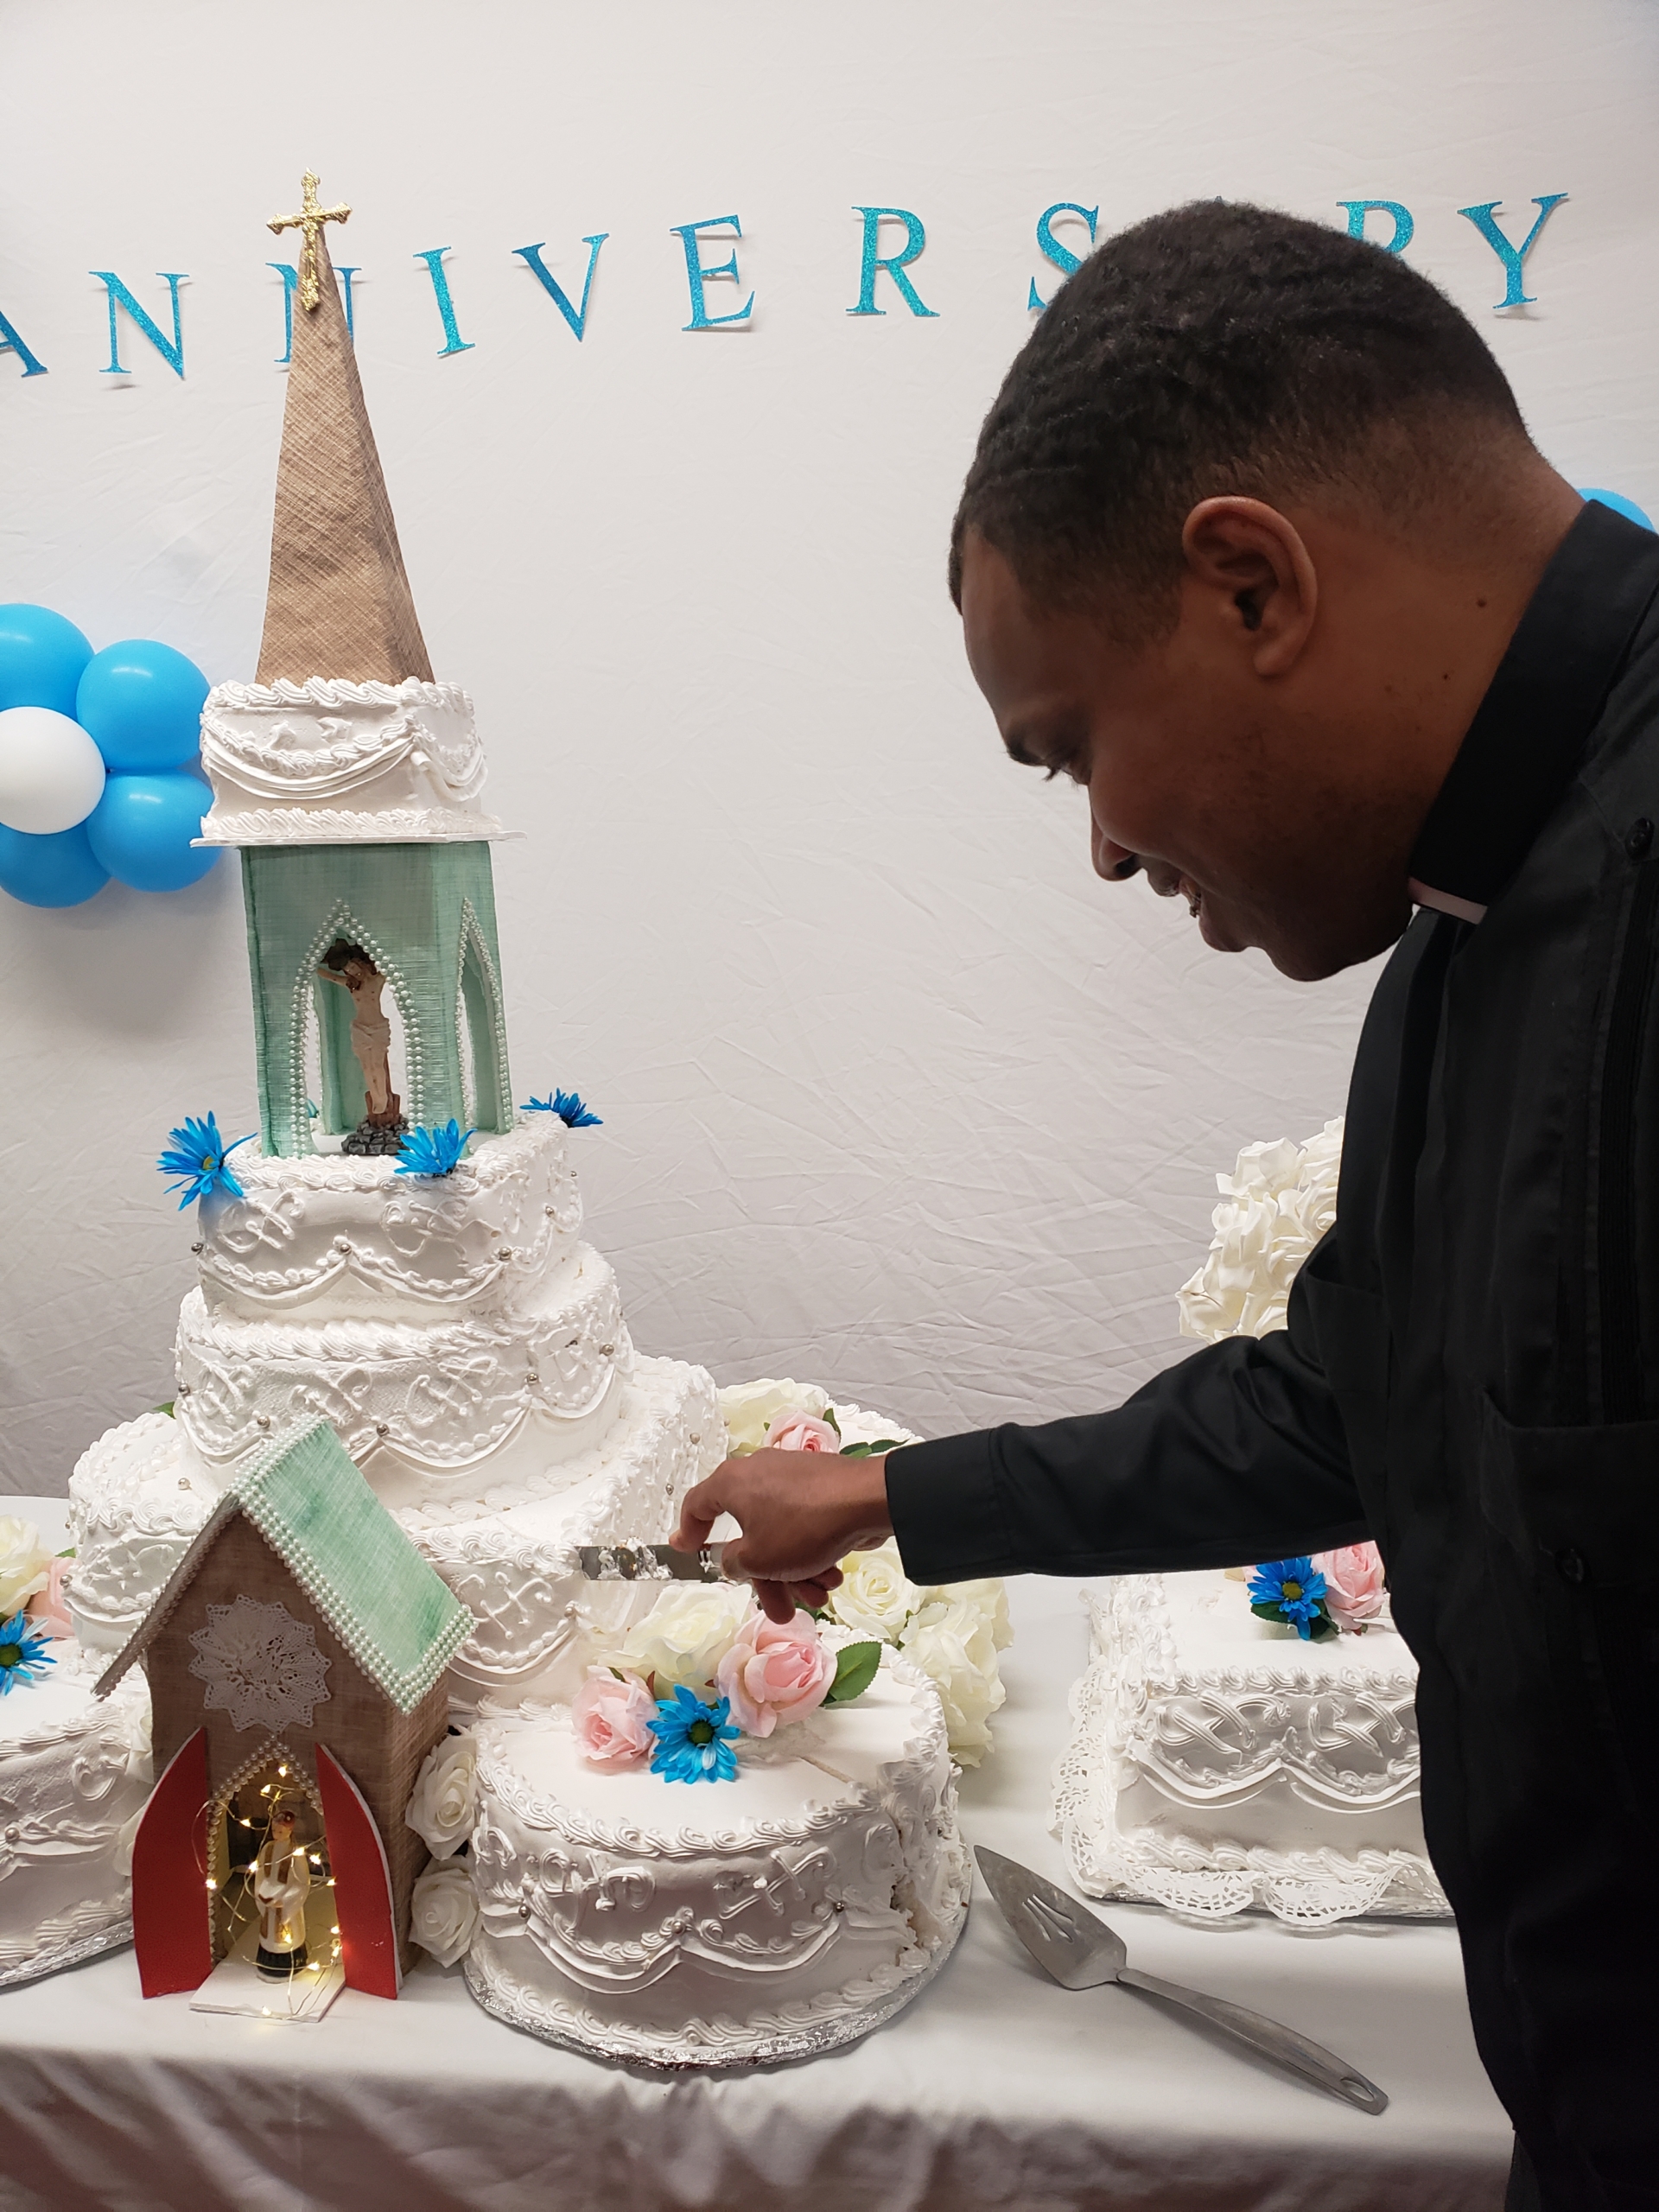 A man cutting a cake with a church on top of it.